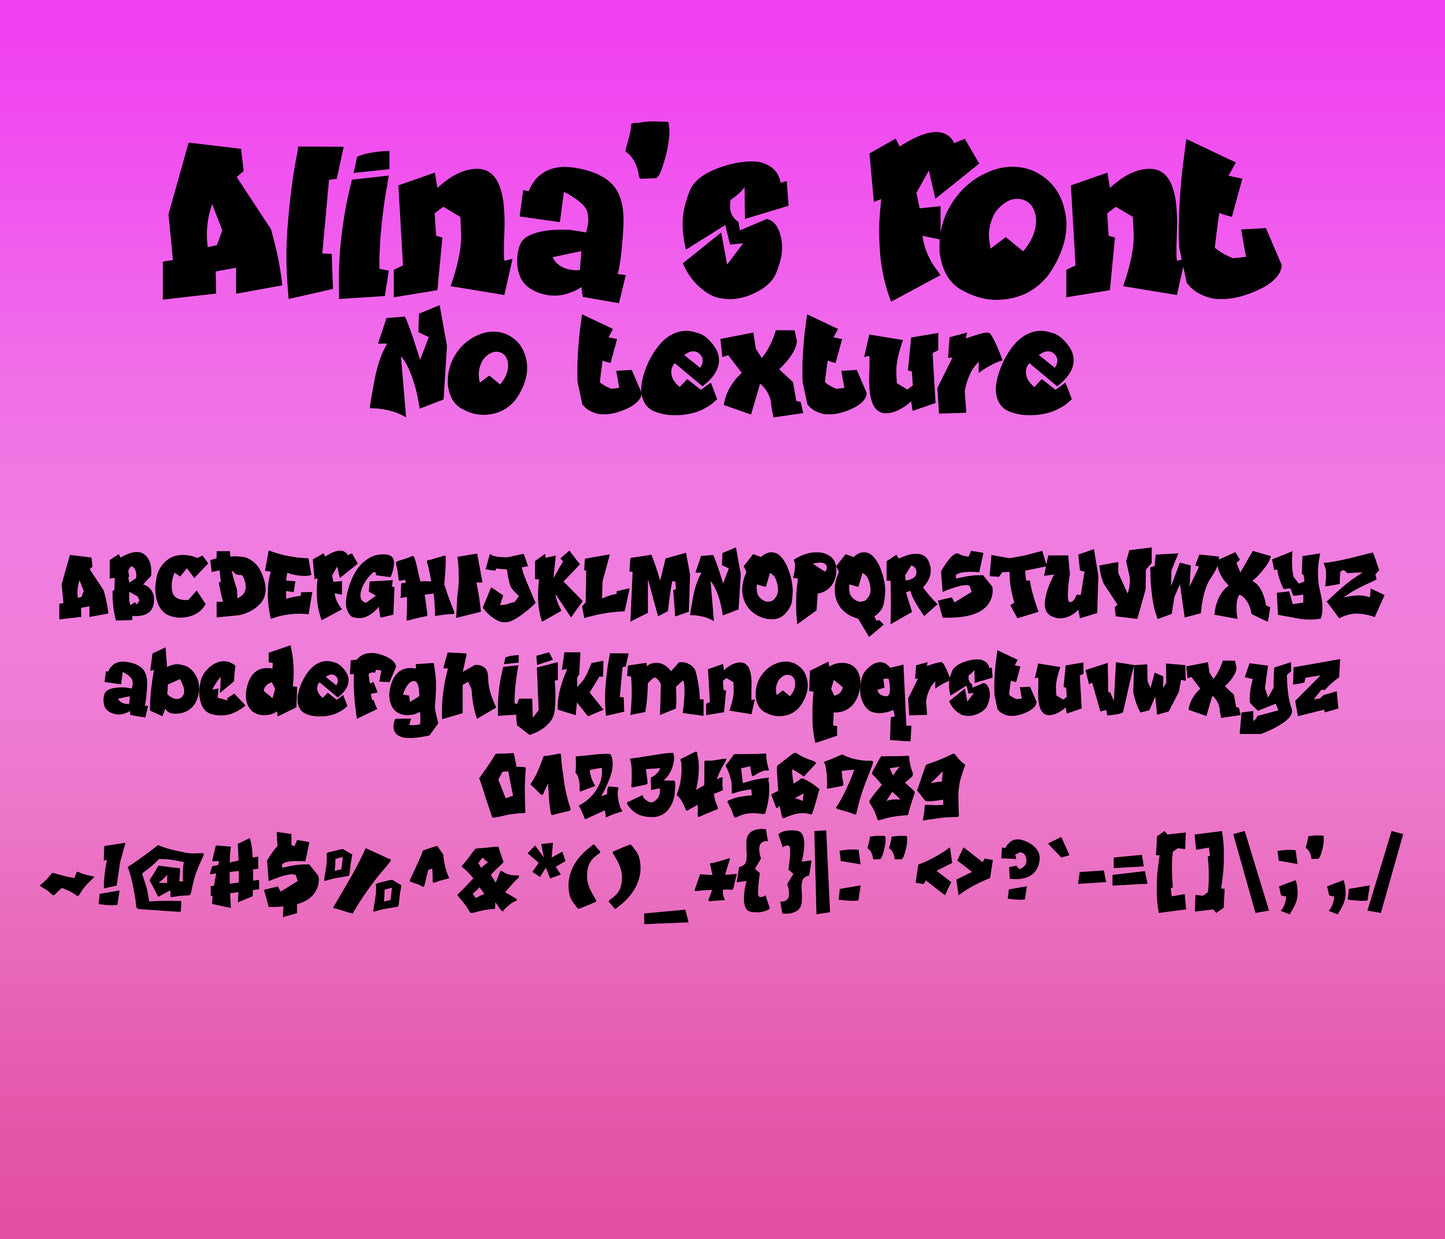 Fresh Prince-Inspired Font